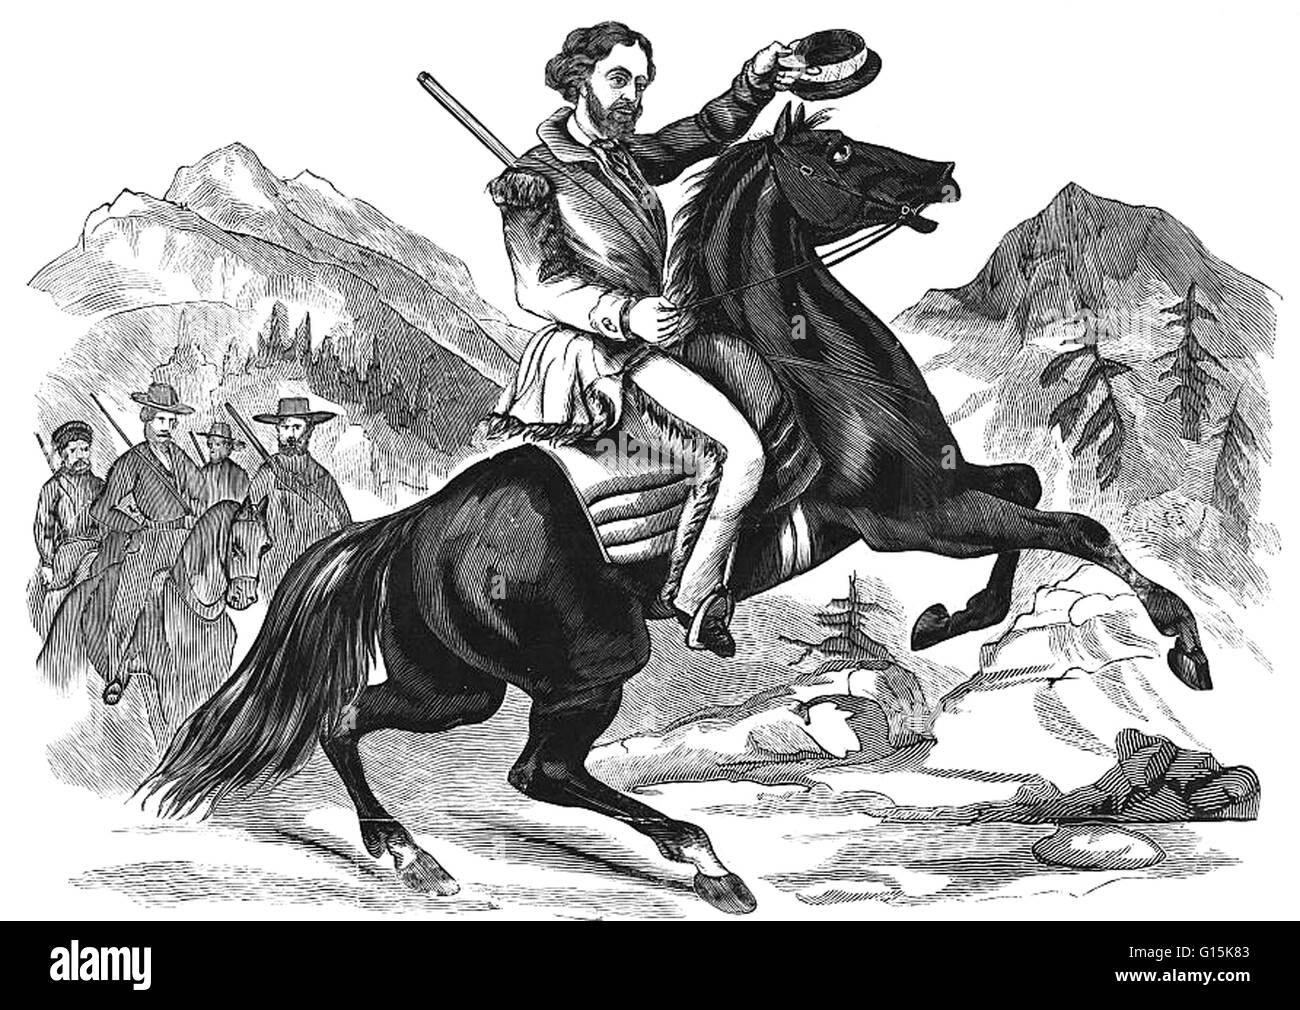 Woodcut entitled: Col. John C. Fremont, Republican candidate for the President of the United States. Fremont, a distinguished soldier and explorer, is mounted on a rearing horse in a mountain setting. Dressed in buckskins and with a rifle slung over his s Stock Photo